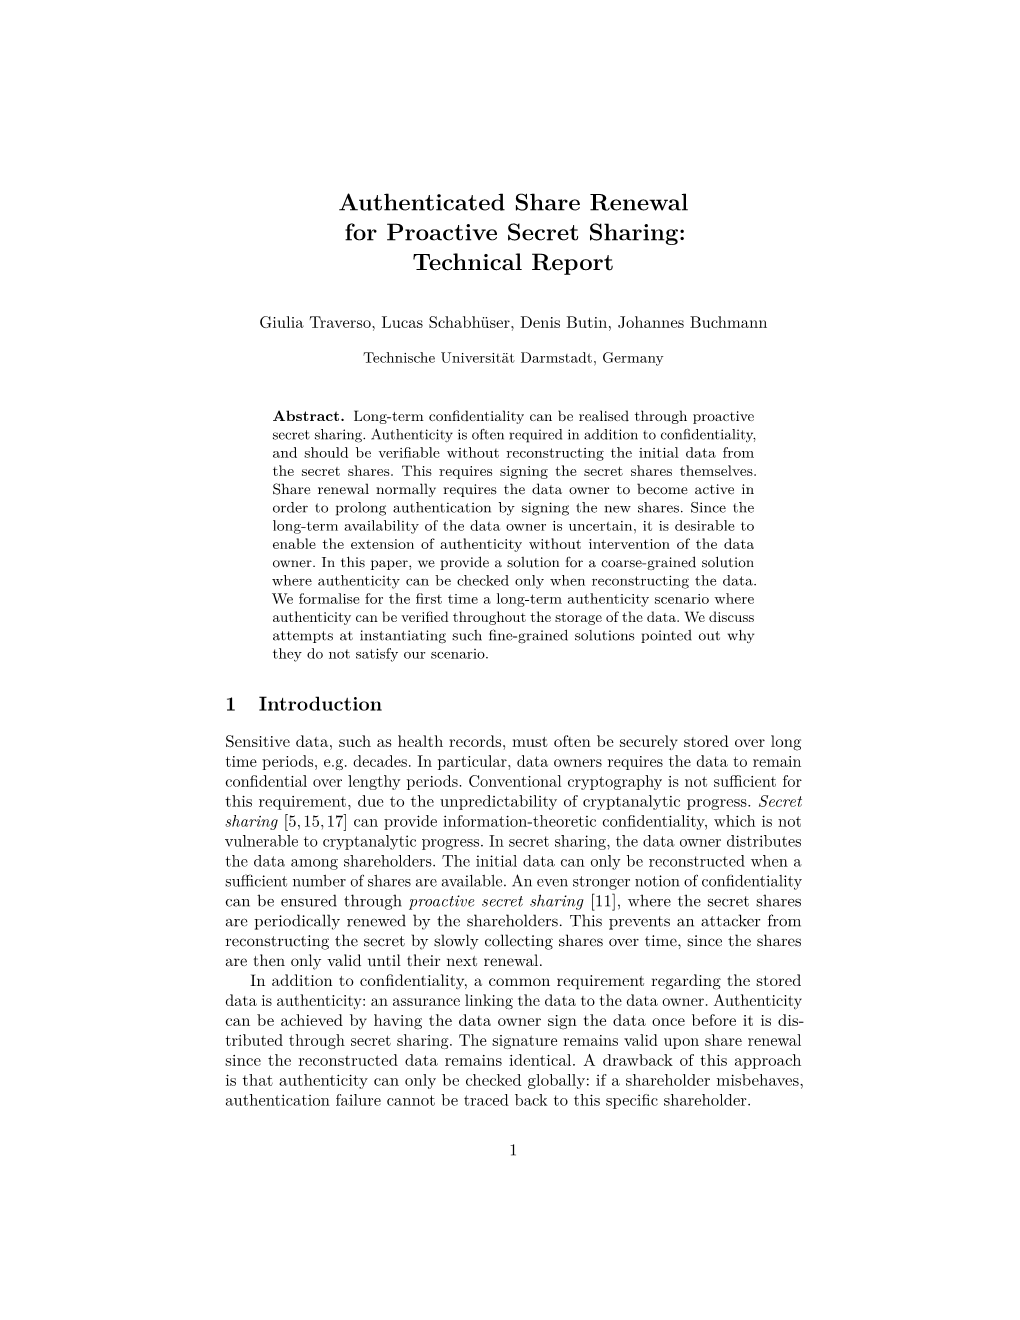 Authenticated Share Renewal for Proactive Secret Sharing: Technical Report